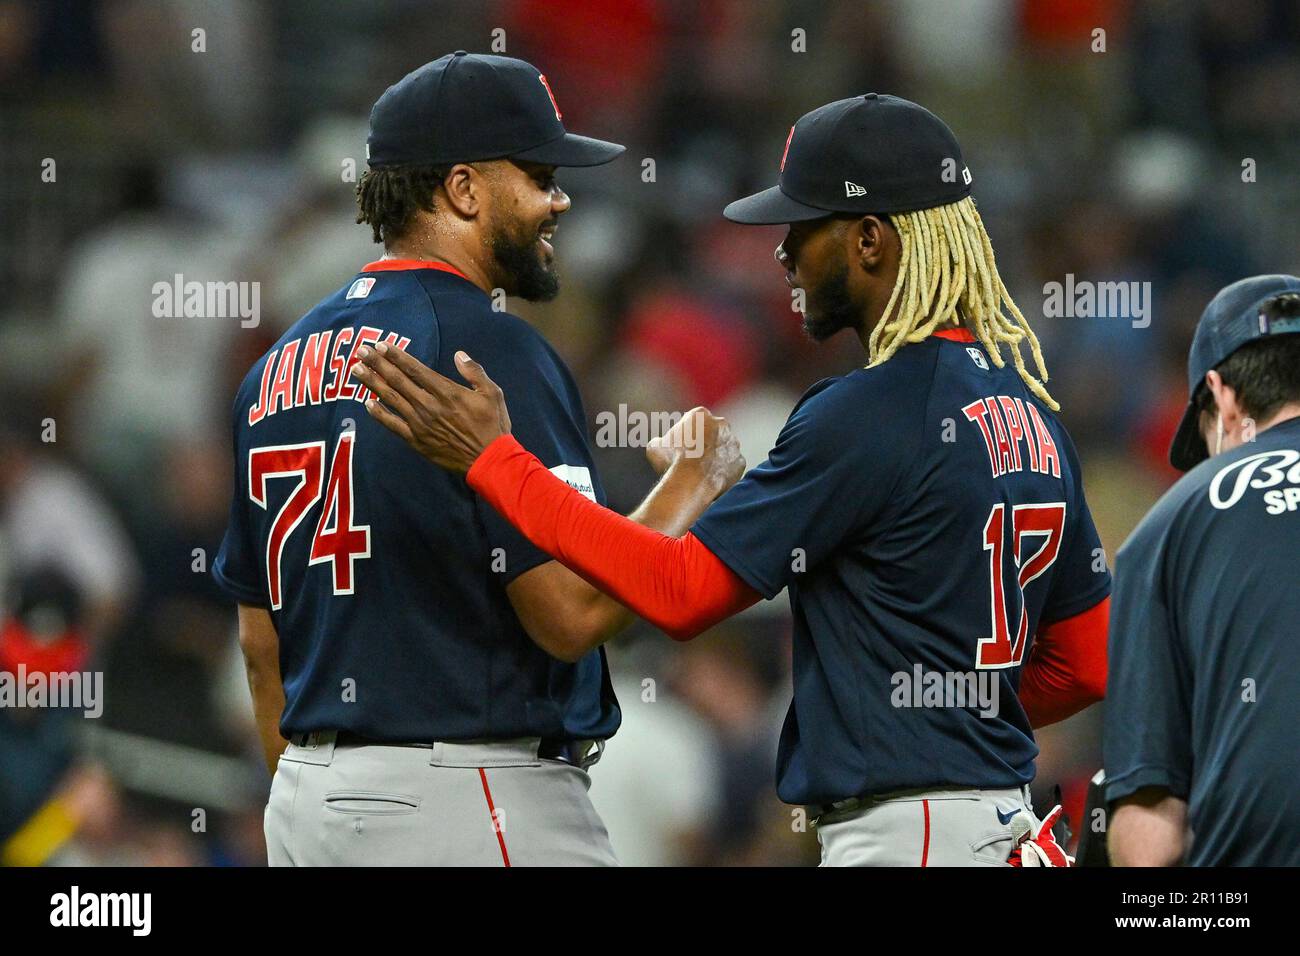 ATLANTA, GA – MAY 10: Boston relief pitcher Kenley Jansen (74) is  congratulated by teammate Raimel Tapia (17) following the conclusion of the  MLB game between the Boston Red Sox and the